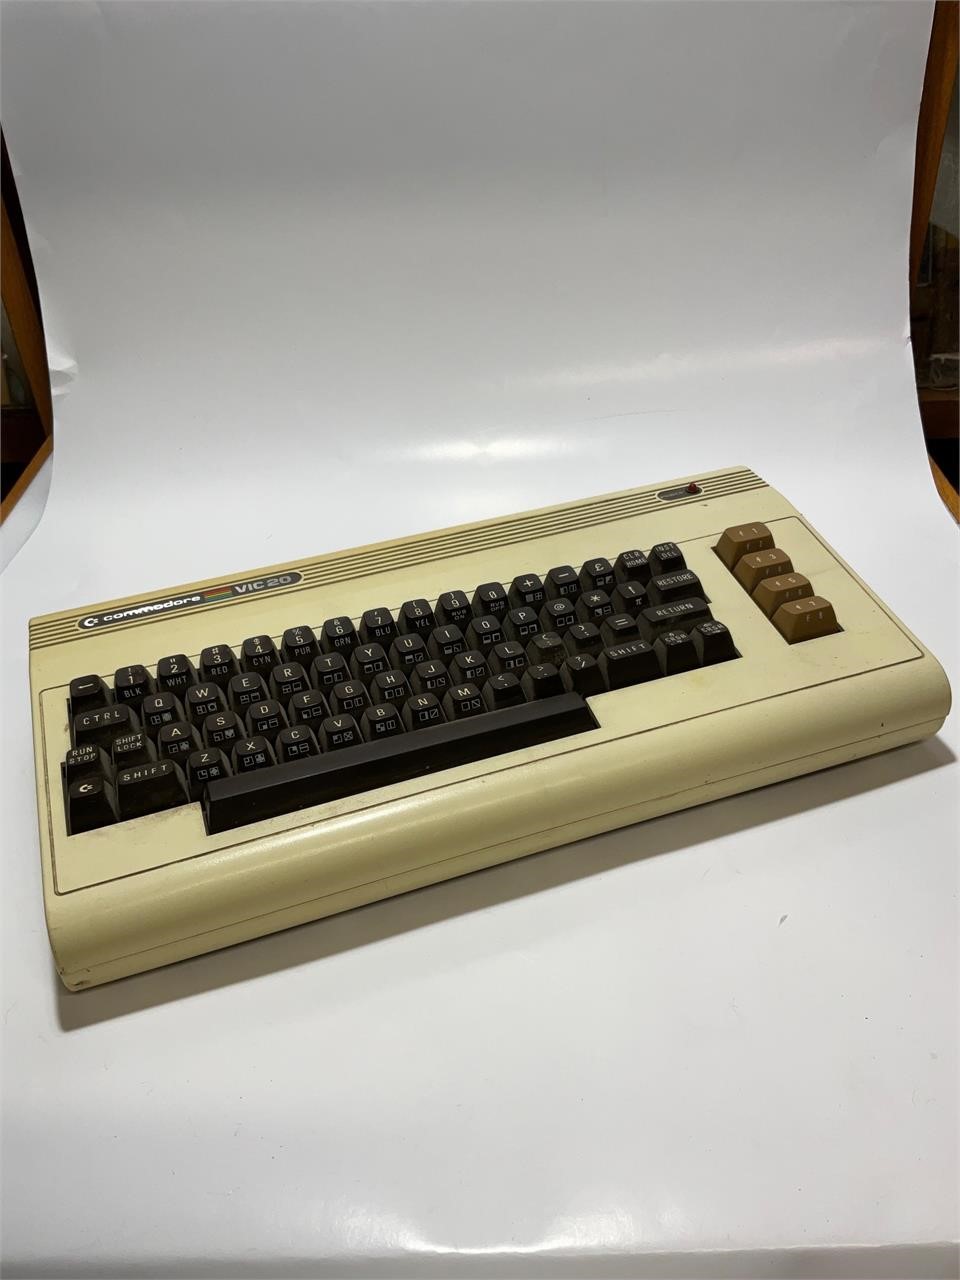 Commodore VIC 20, turns on